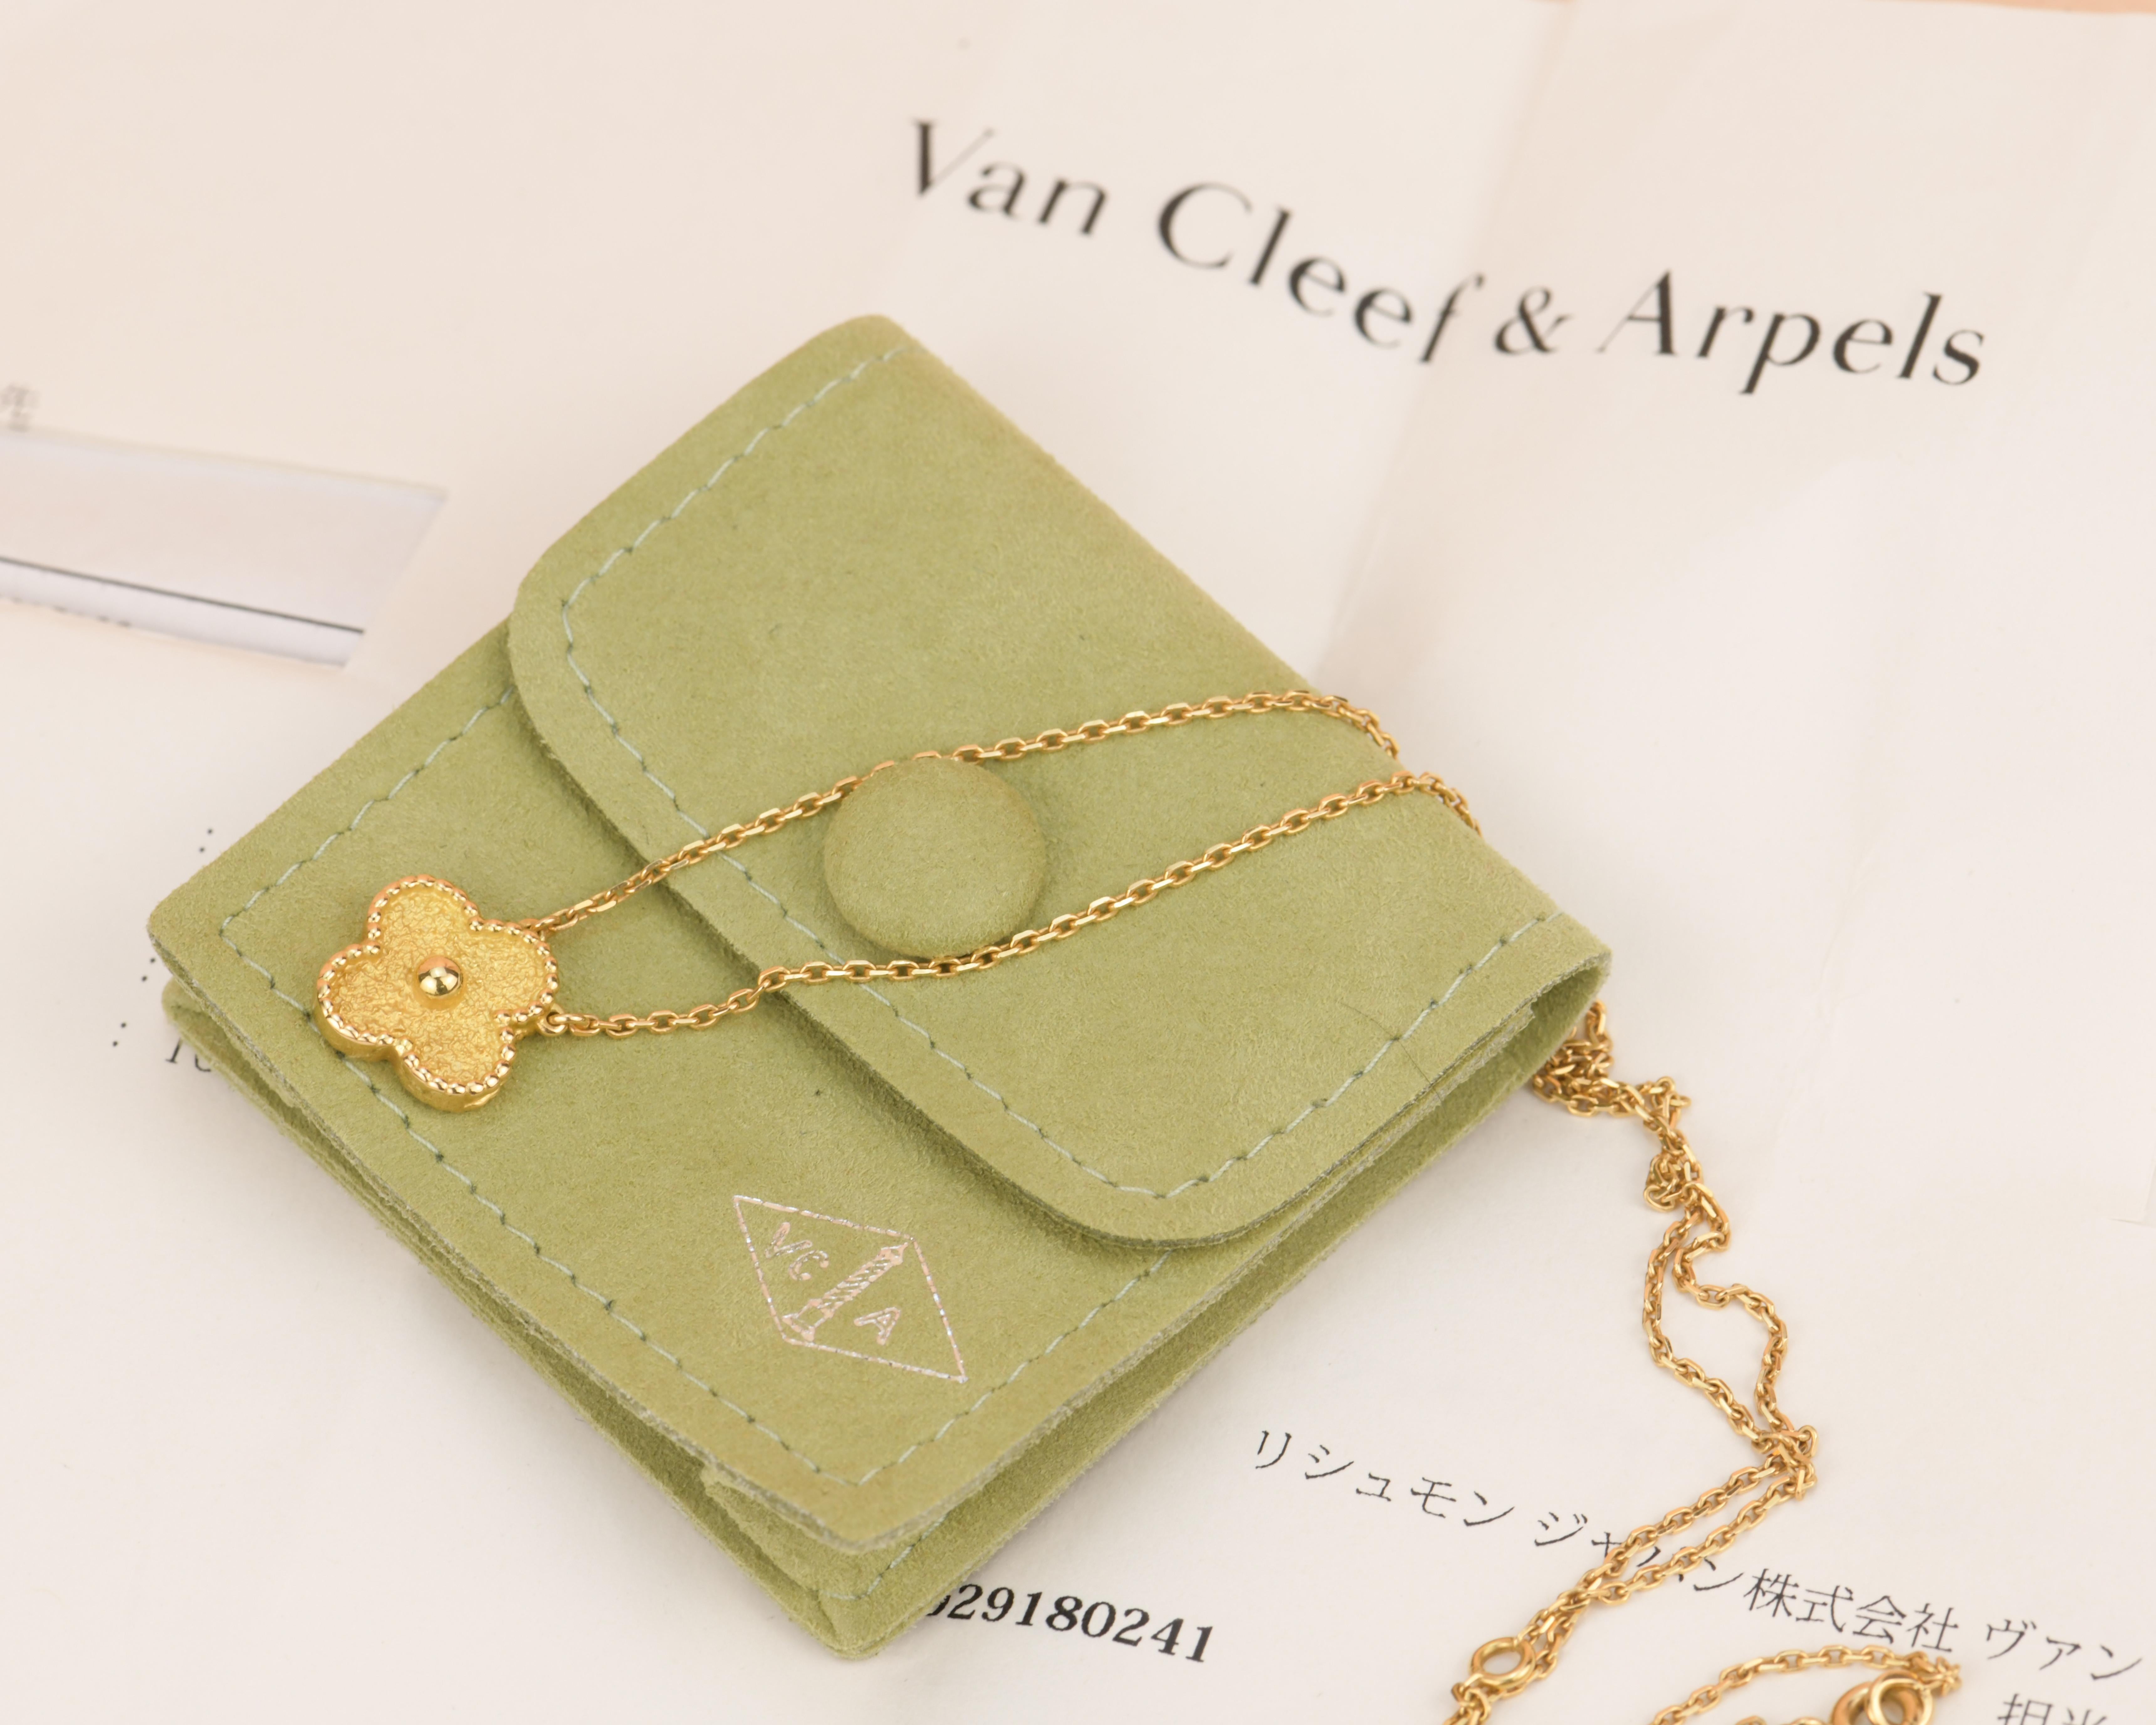 Dandelion Antiques Code	AT-1344
Brand	                                Van Cleef & Arpels
Date	                                Circa 90s
Retail Price	                       £2,600 Including taxes / $ 2,930 Excluding taxes / 3150 € Including